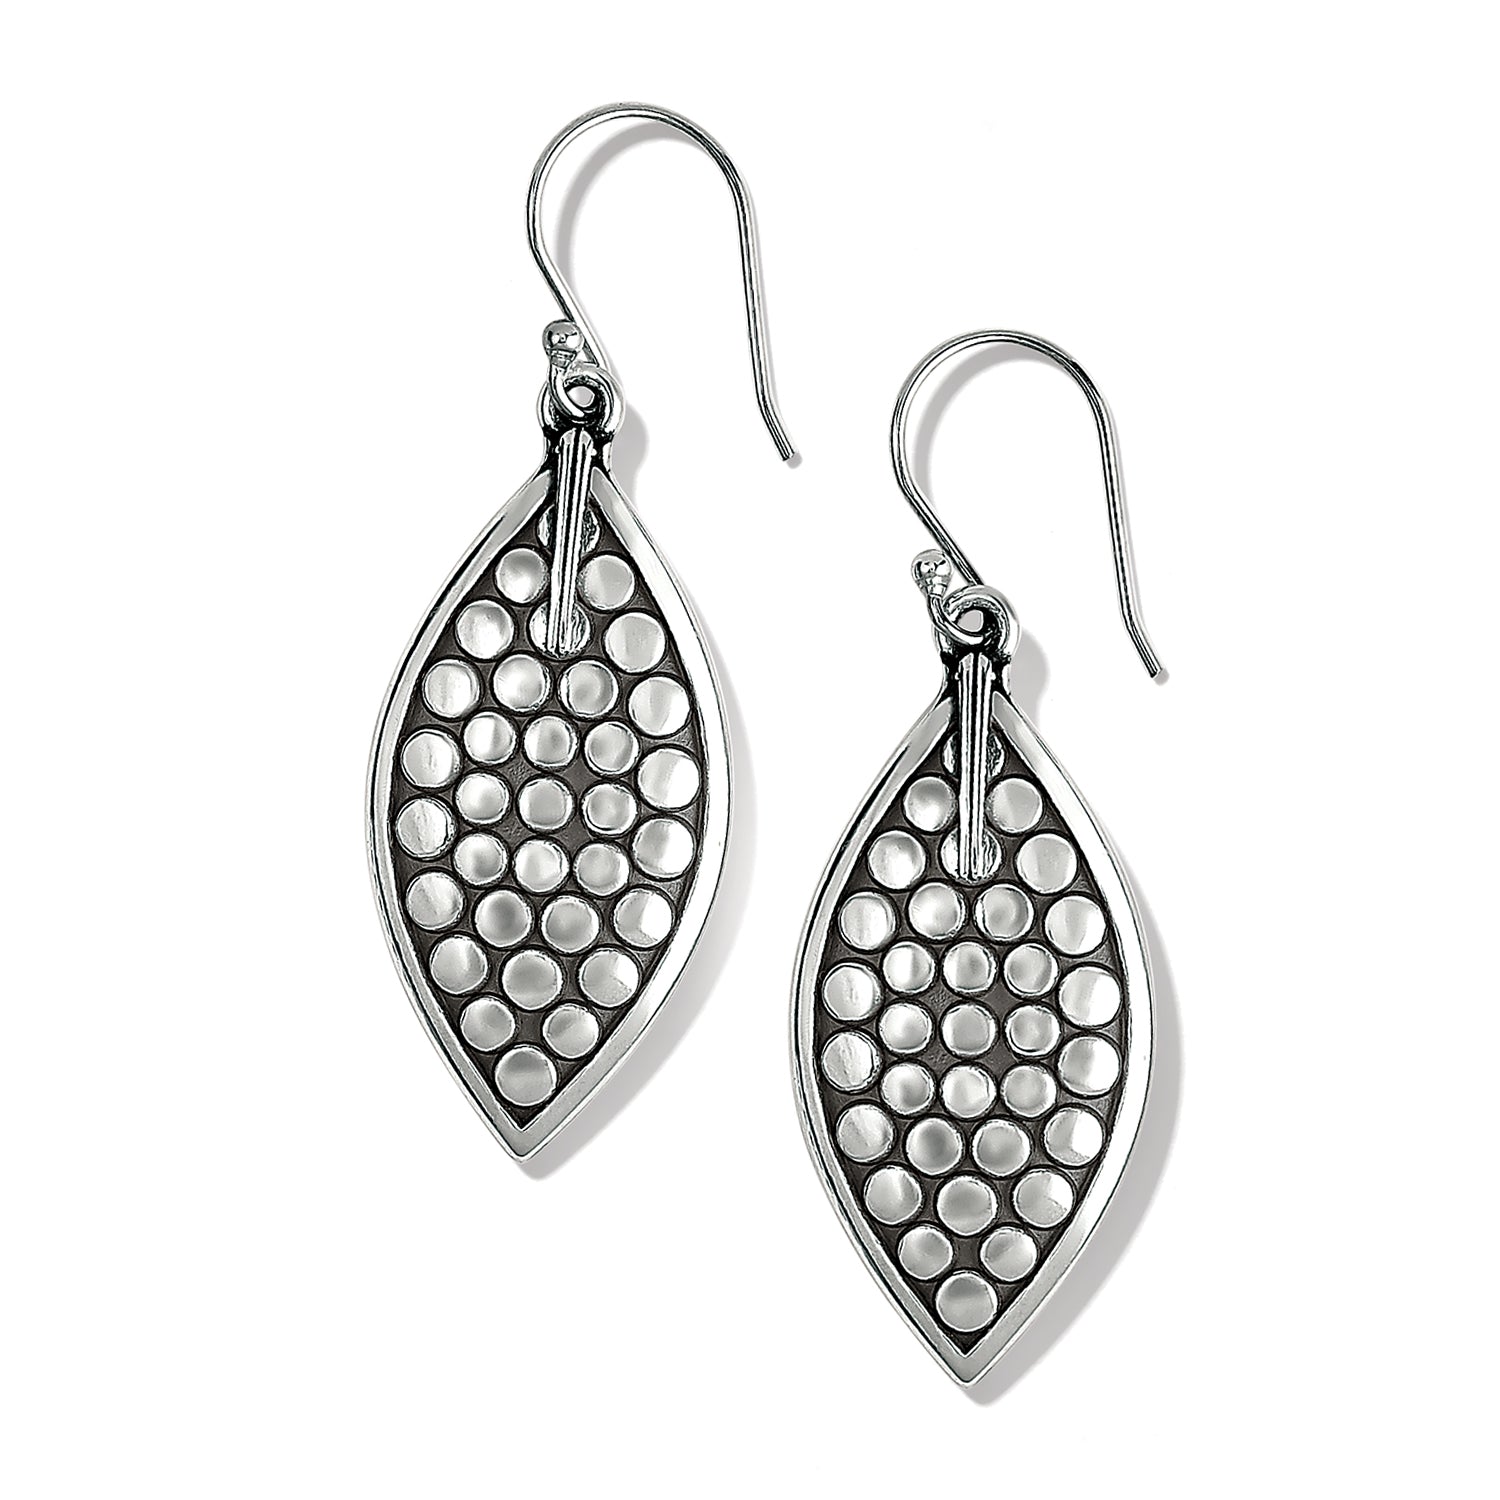 Pebble Leaf Reversible French Wire Earrings - Image 1 - Brighton Designs